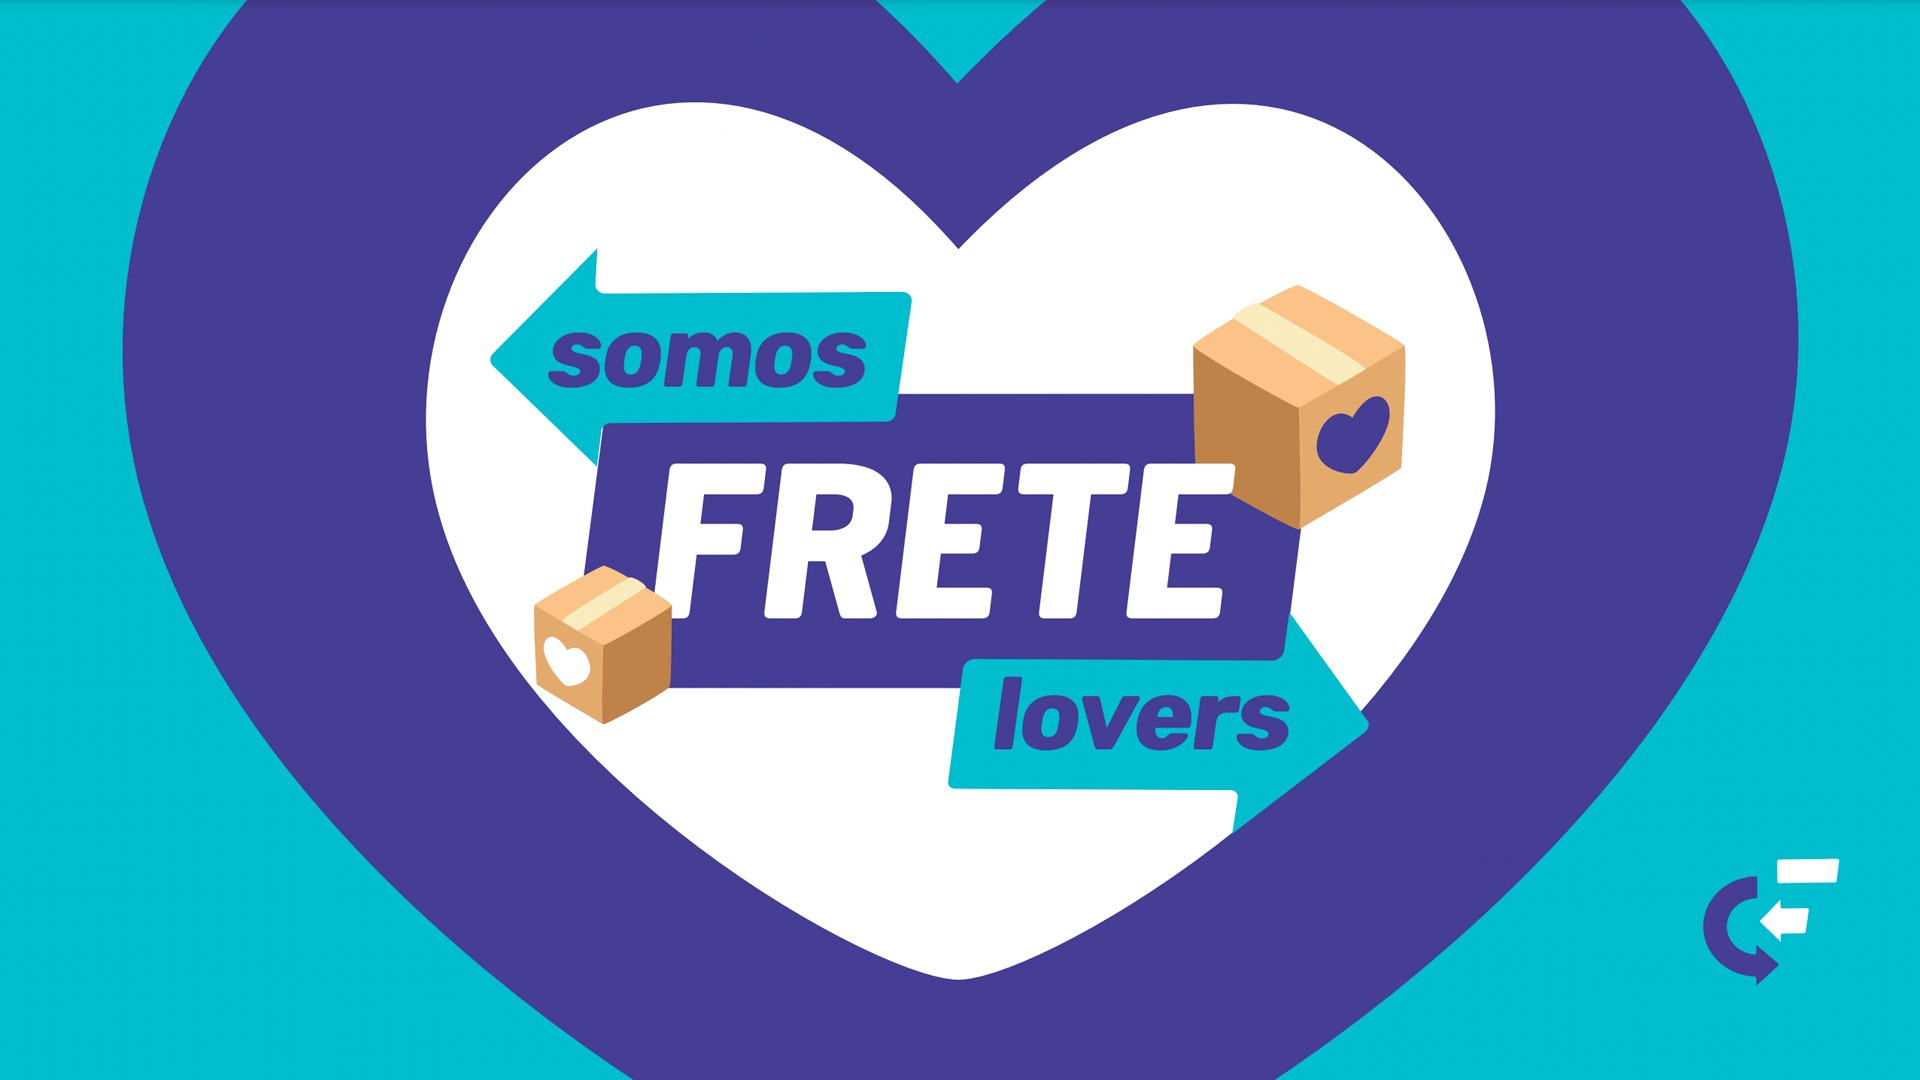 You are currently viewing Campanha Interna: Somos Frete Lovers